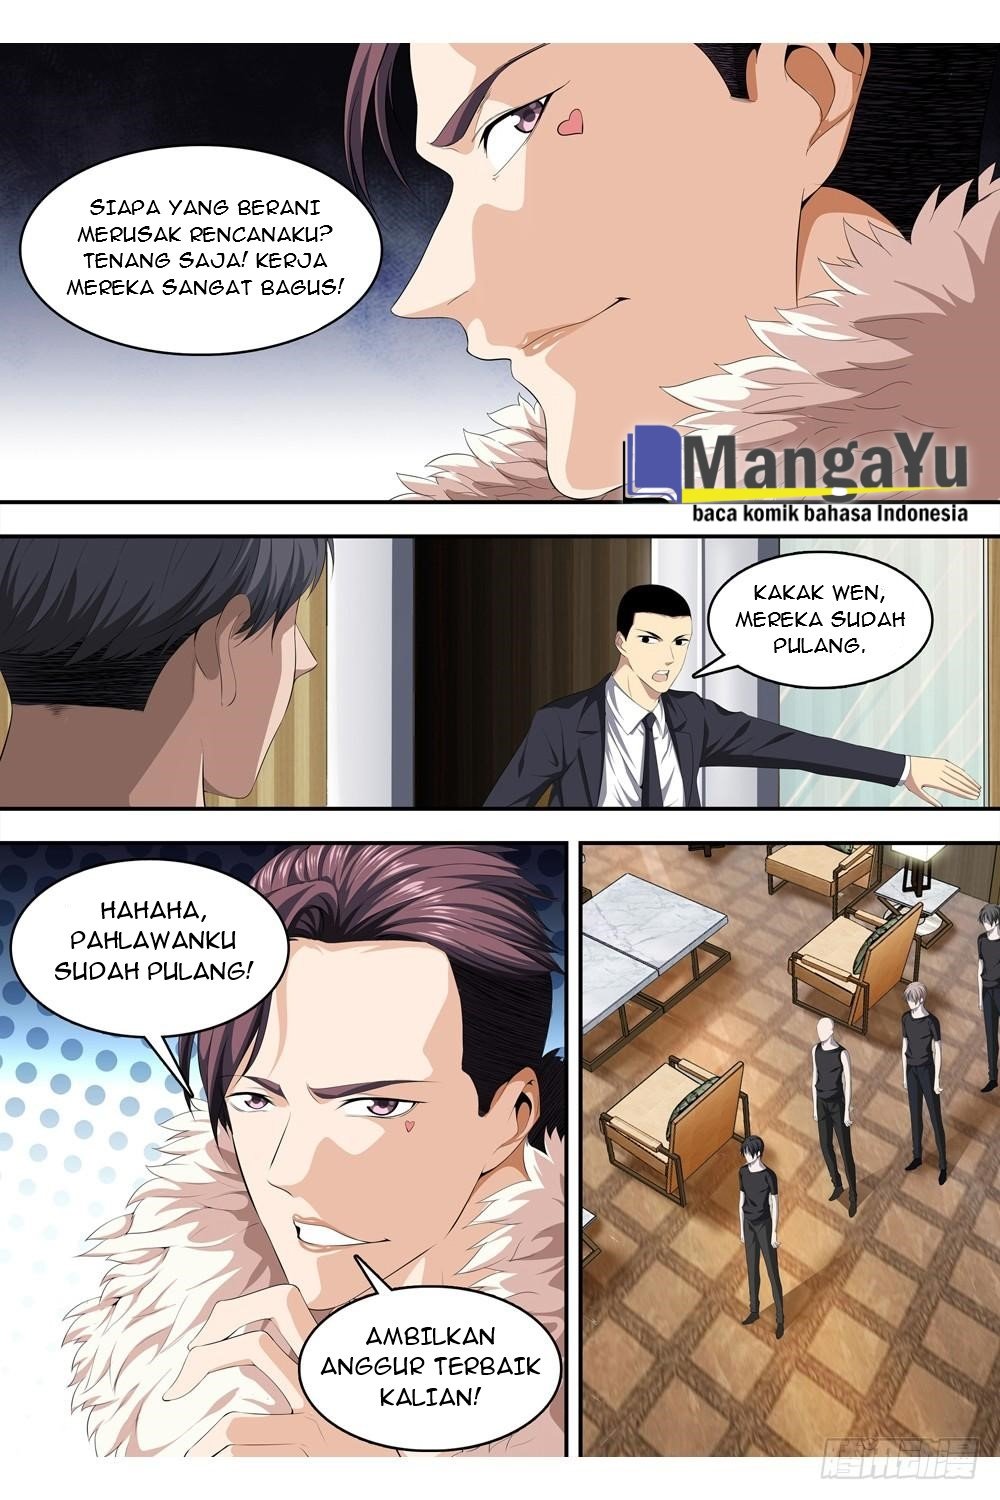 Strongest System Yan Luo Chapter 14